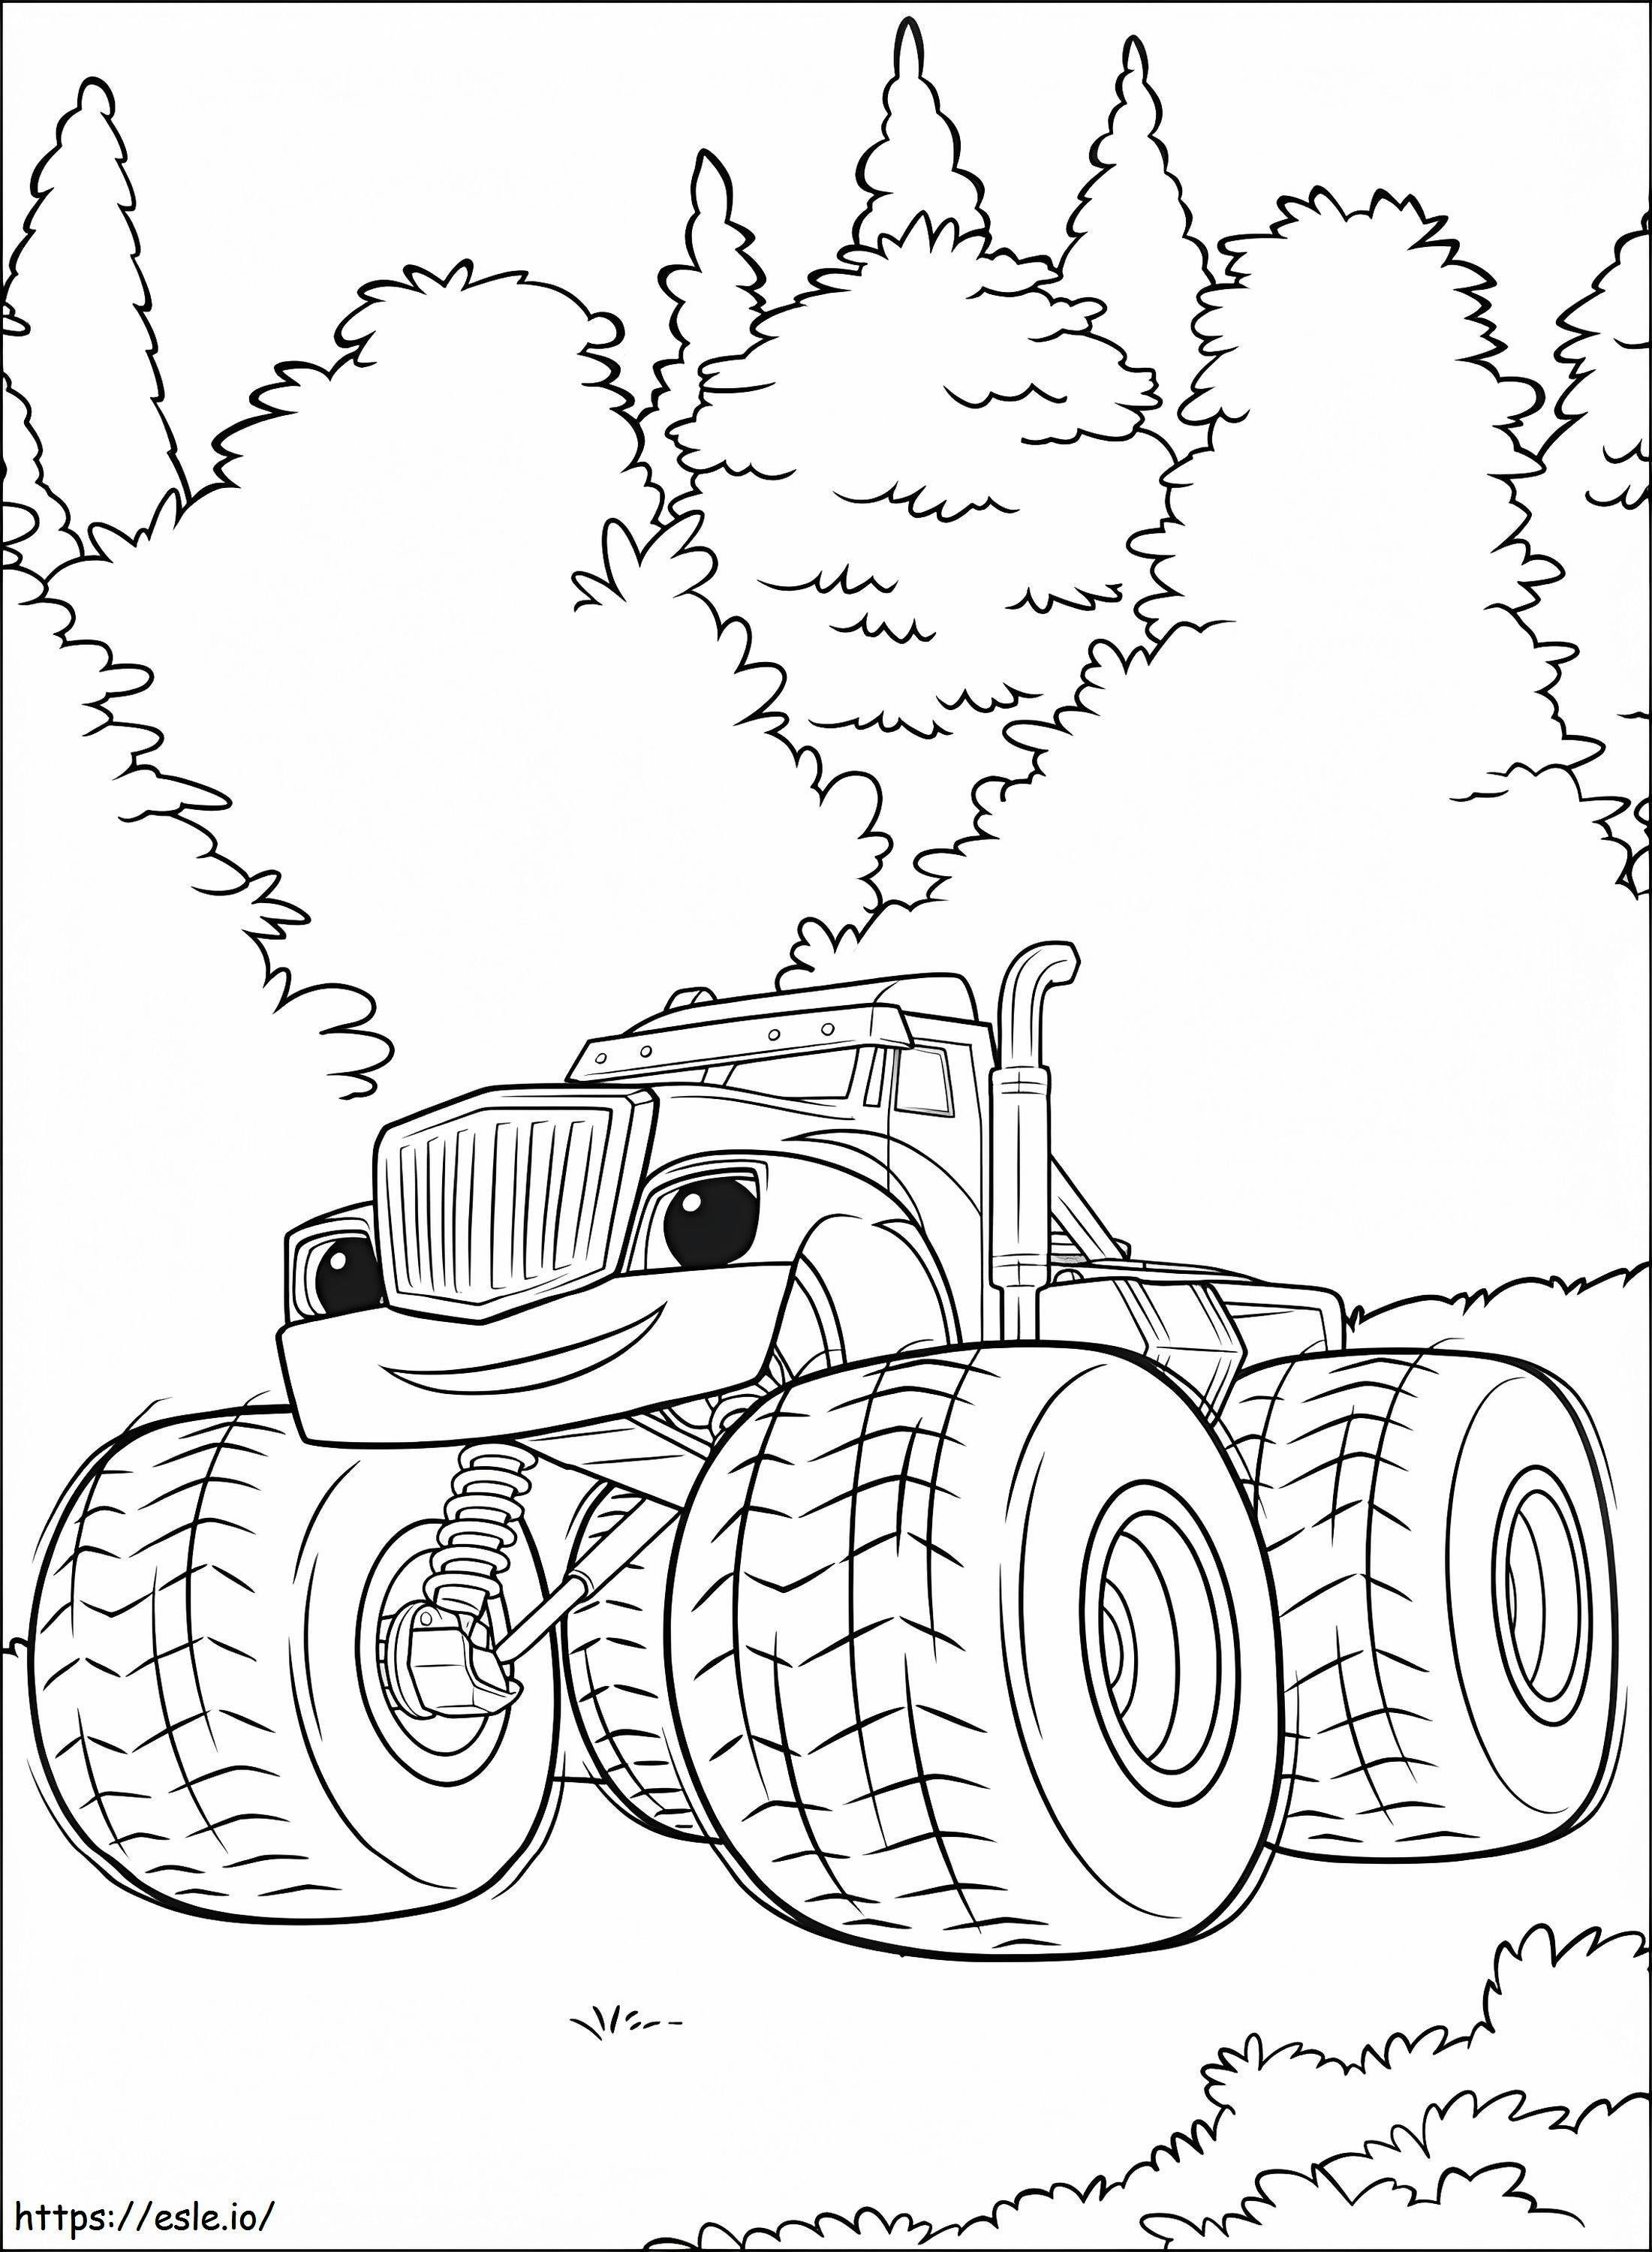 1533952723 Crusher Running A4 coloring page